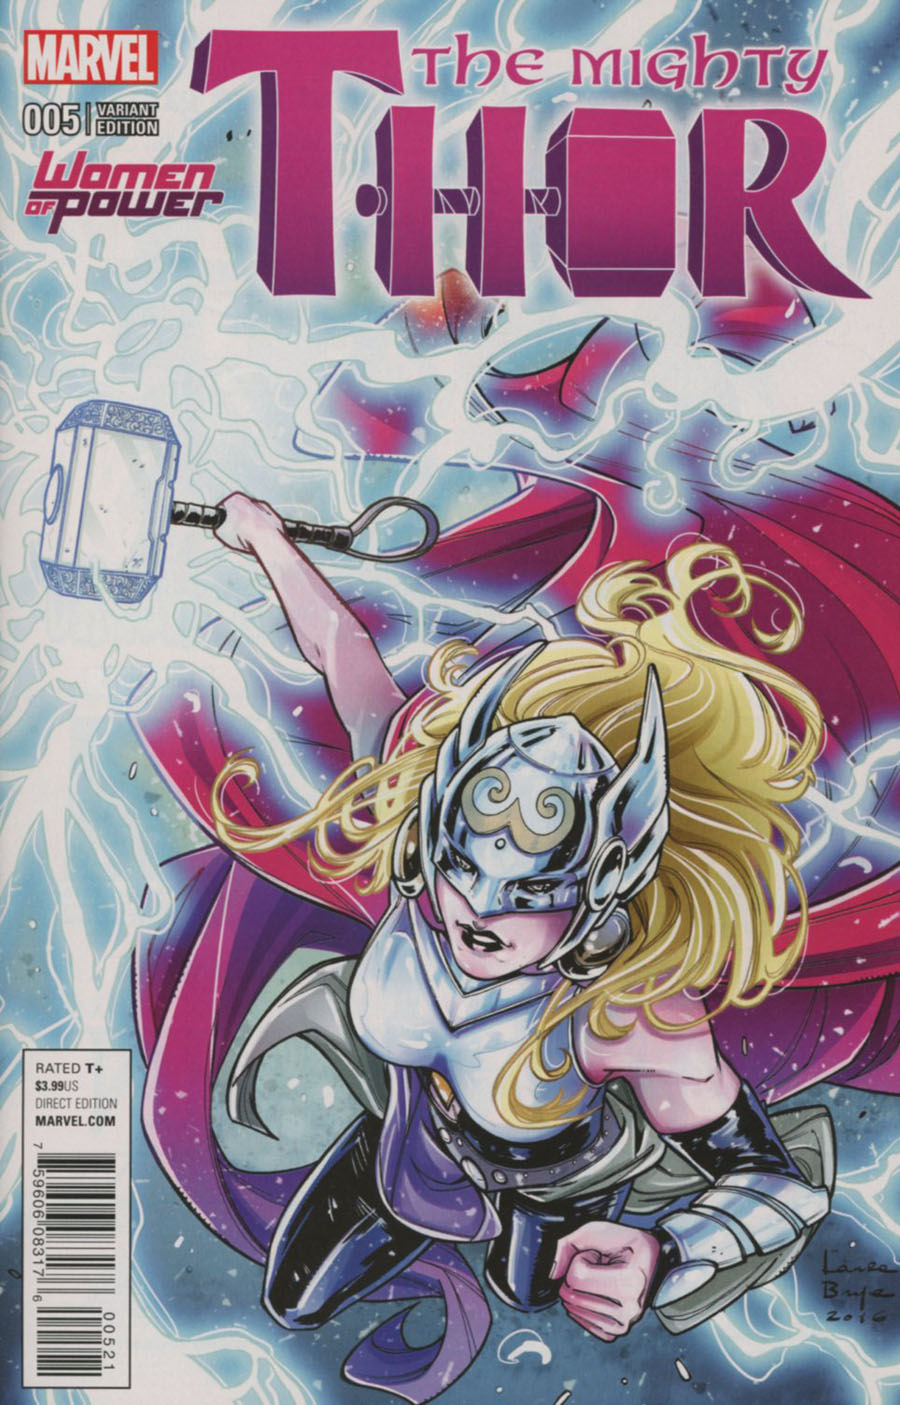 Mighty Thor Vol 2 #5 Cover B Variant Women Of Power Cover